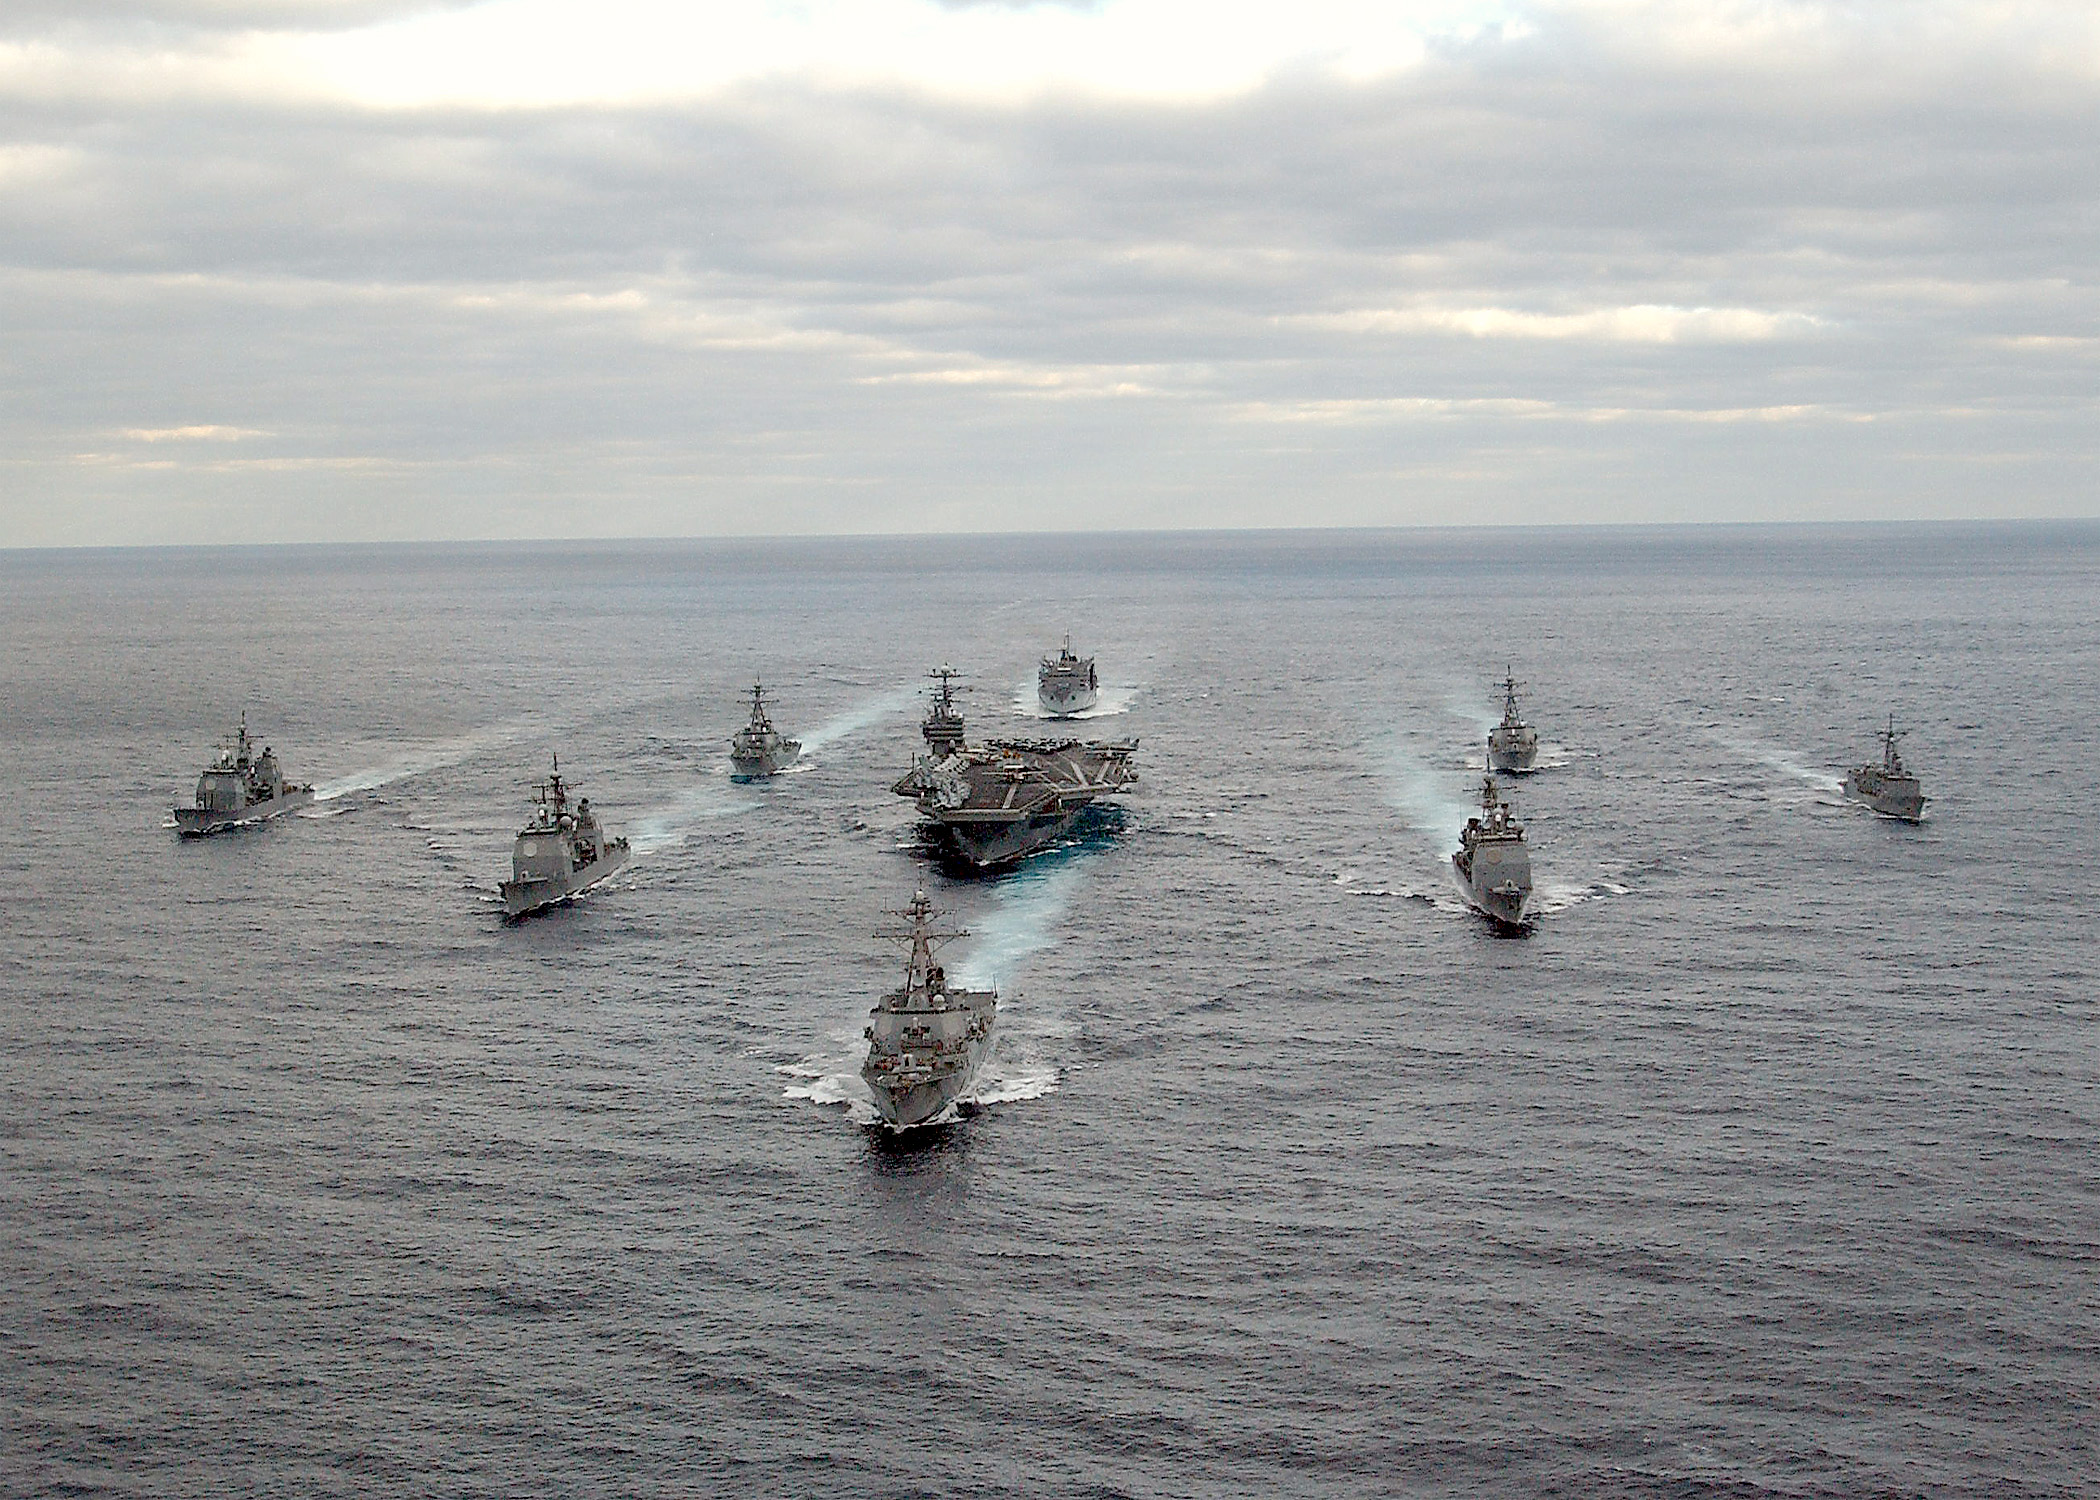 031130-N-3653A-002- Atlantic Ocean (Nov. 30, 2003) -- USS George Washington (CVN 73) Carrier Strike Group formation sails in the Atlantic Ocean. Washington is conducting Composite Training Unit Exercise (COMPTUEX) in preparation for their upcoming deployment. U.S Navy photo by Photographers Mate 2nd Class Summer M. Anderson. (RELEASED)